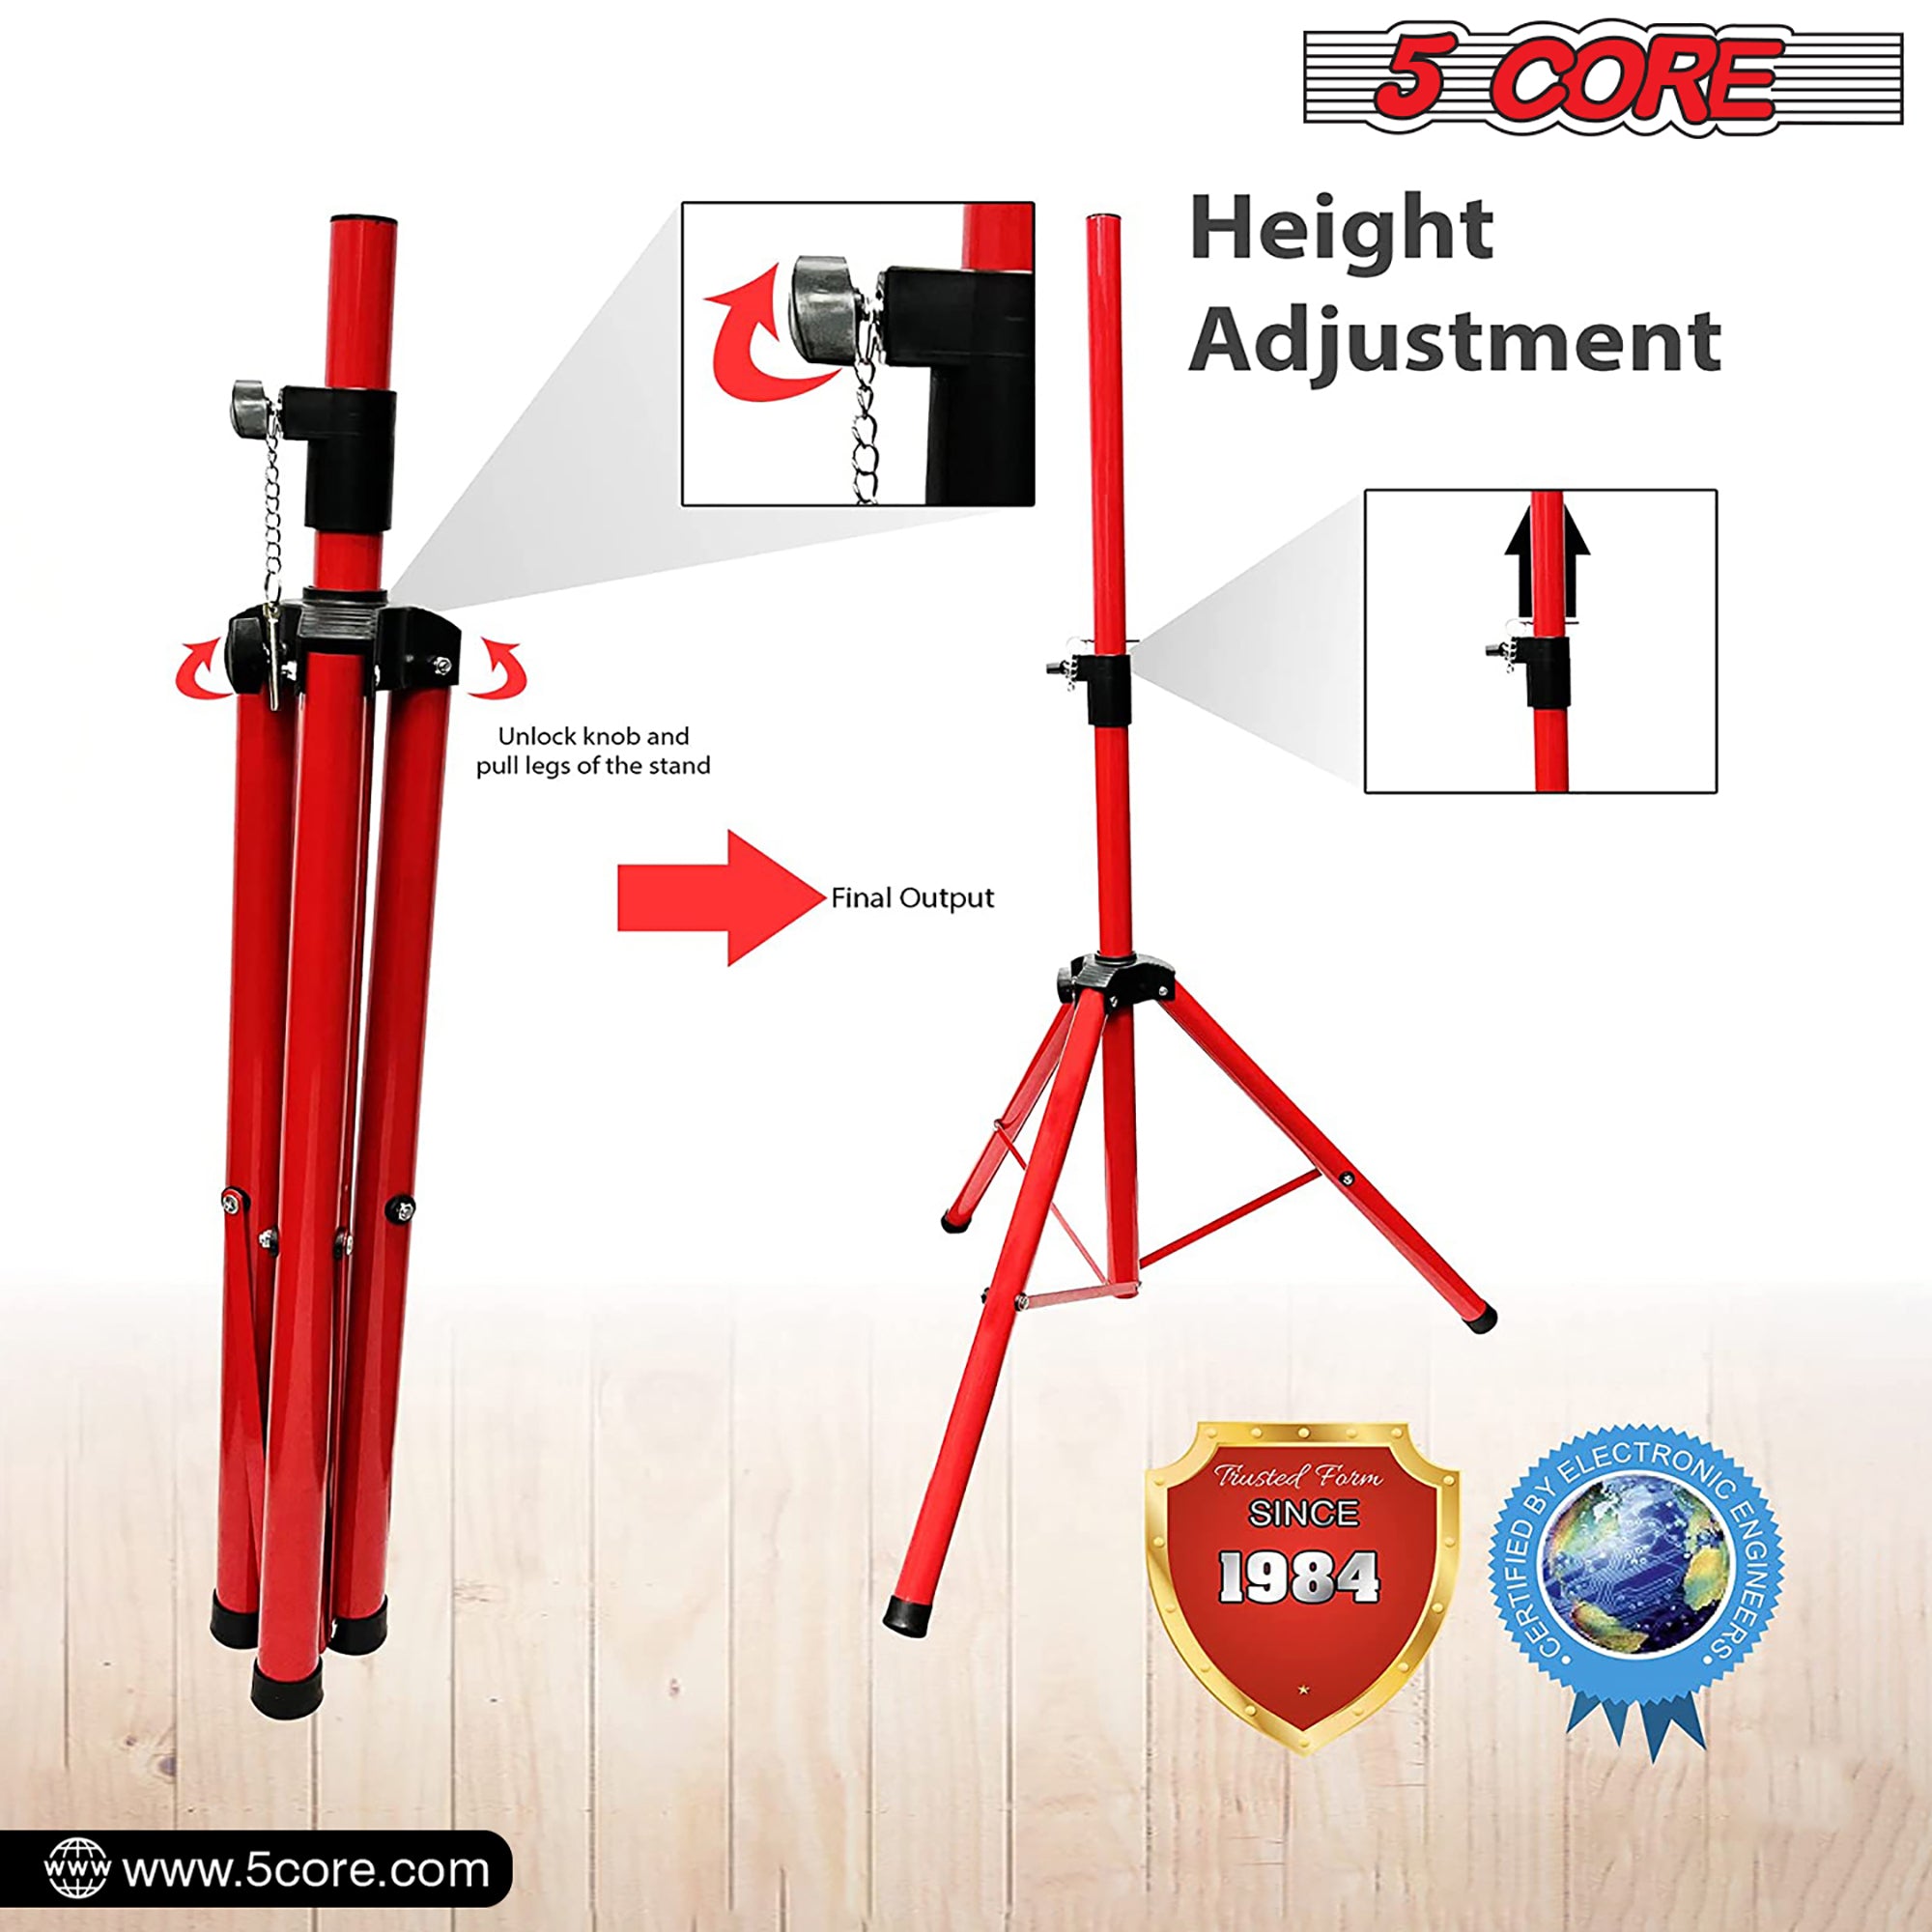 5 Core speaker Stand 2 Pieces Subwoofer Stands Red Height Adjustable Light Weight Studio PA Speaker Holder for Large Speakers w Locking Safety PIN and 35mm Compatible Insert On Stage In Studio Use - SS ECO 2PK RED WoB